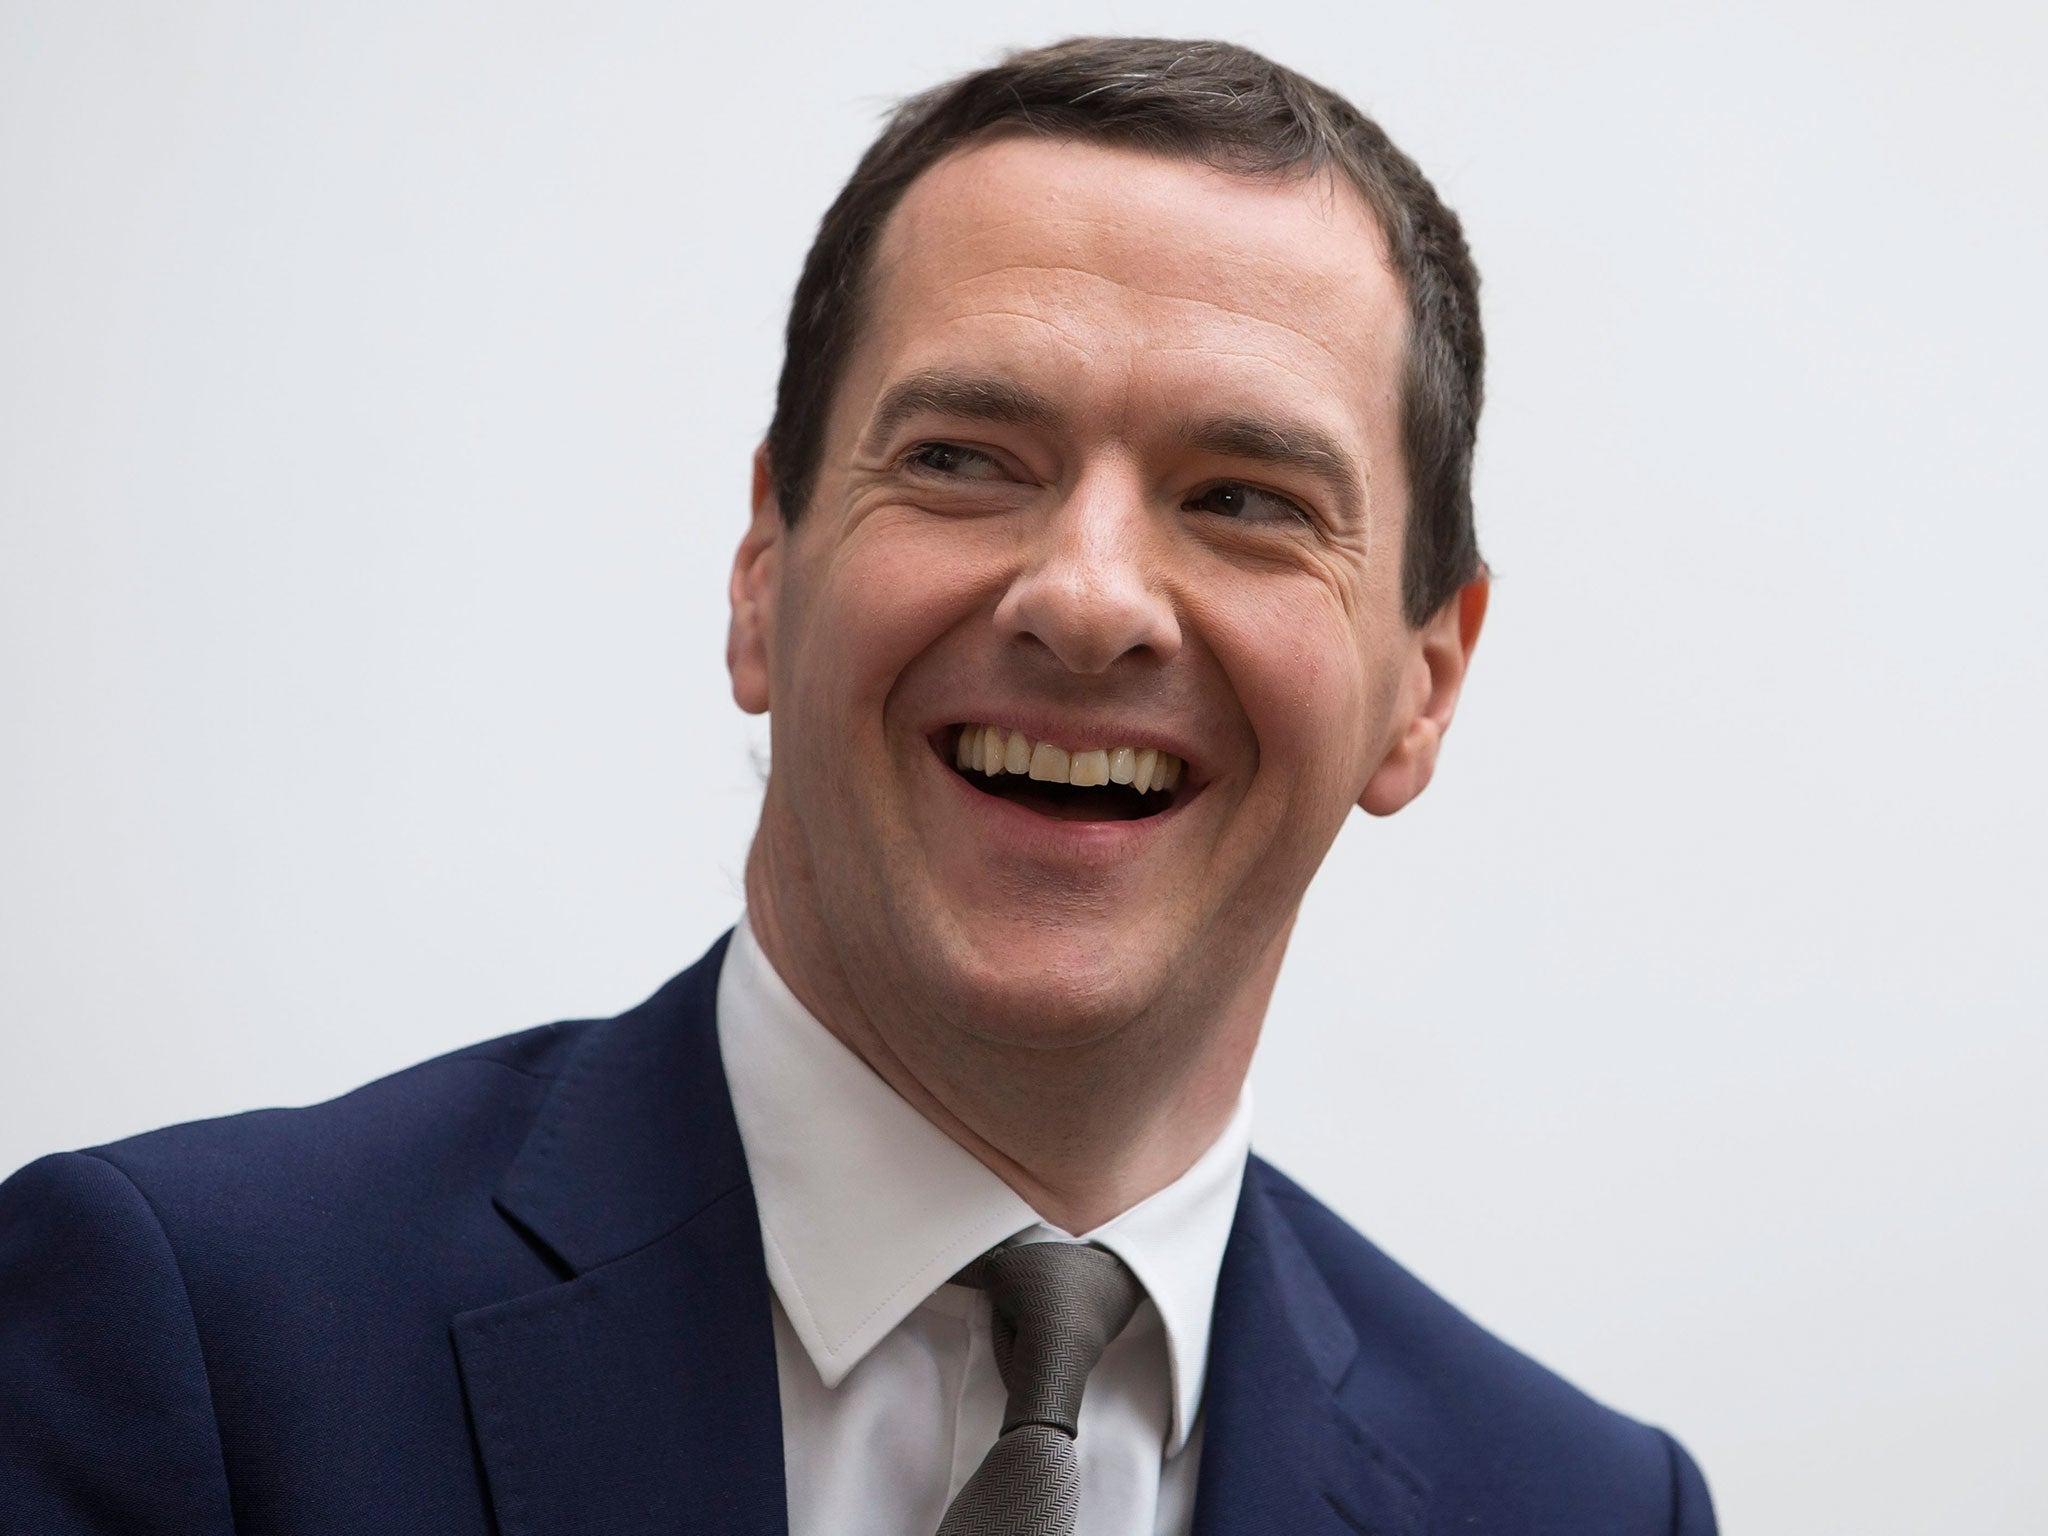 George Osborne is alleged to have held a meeting with Rupert Murdoch in late June